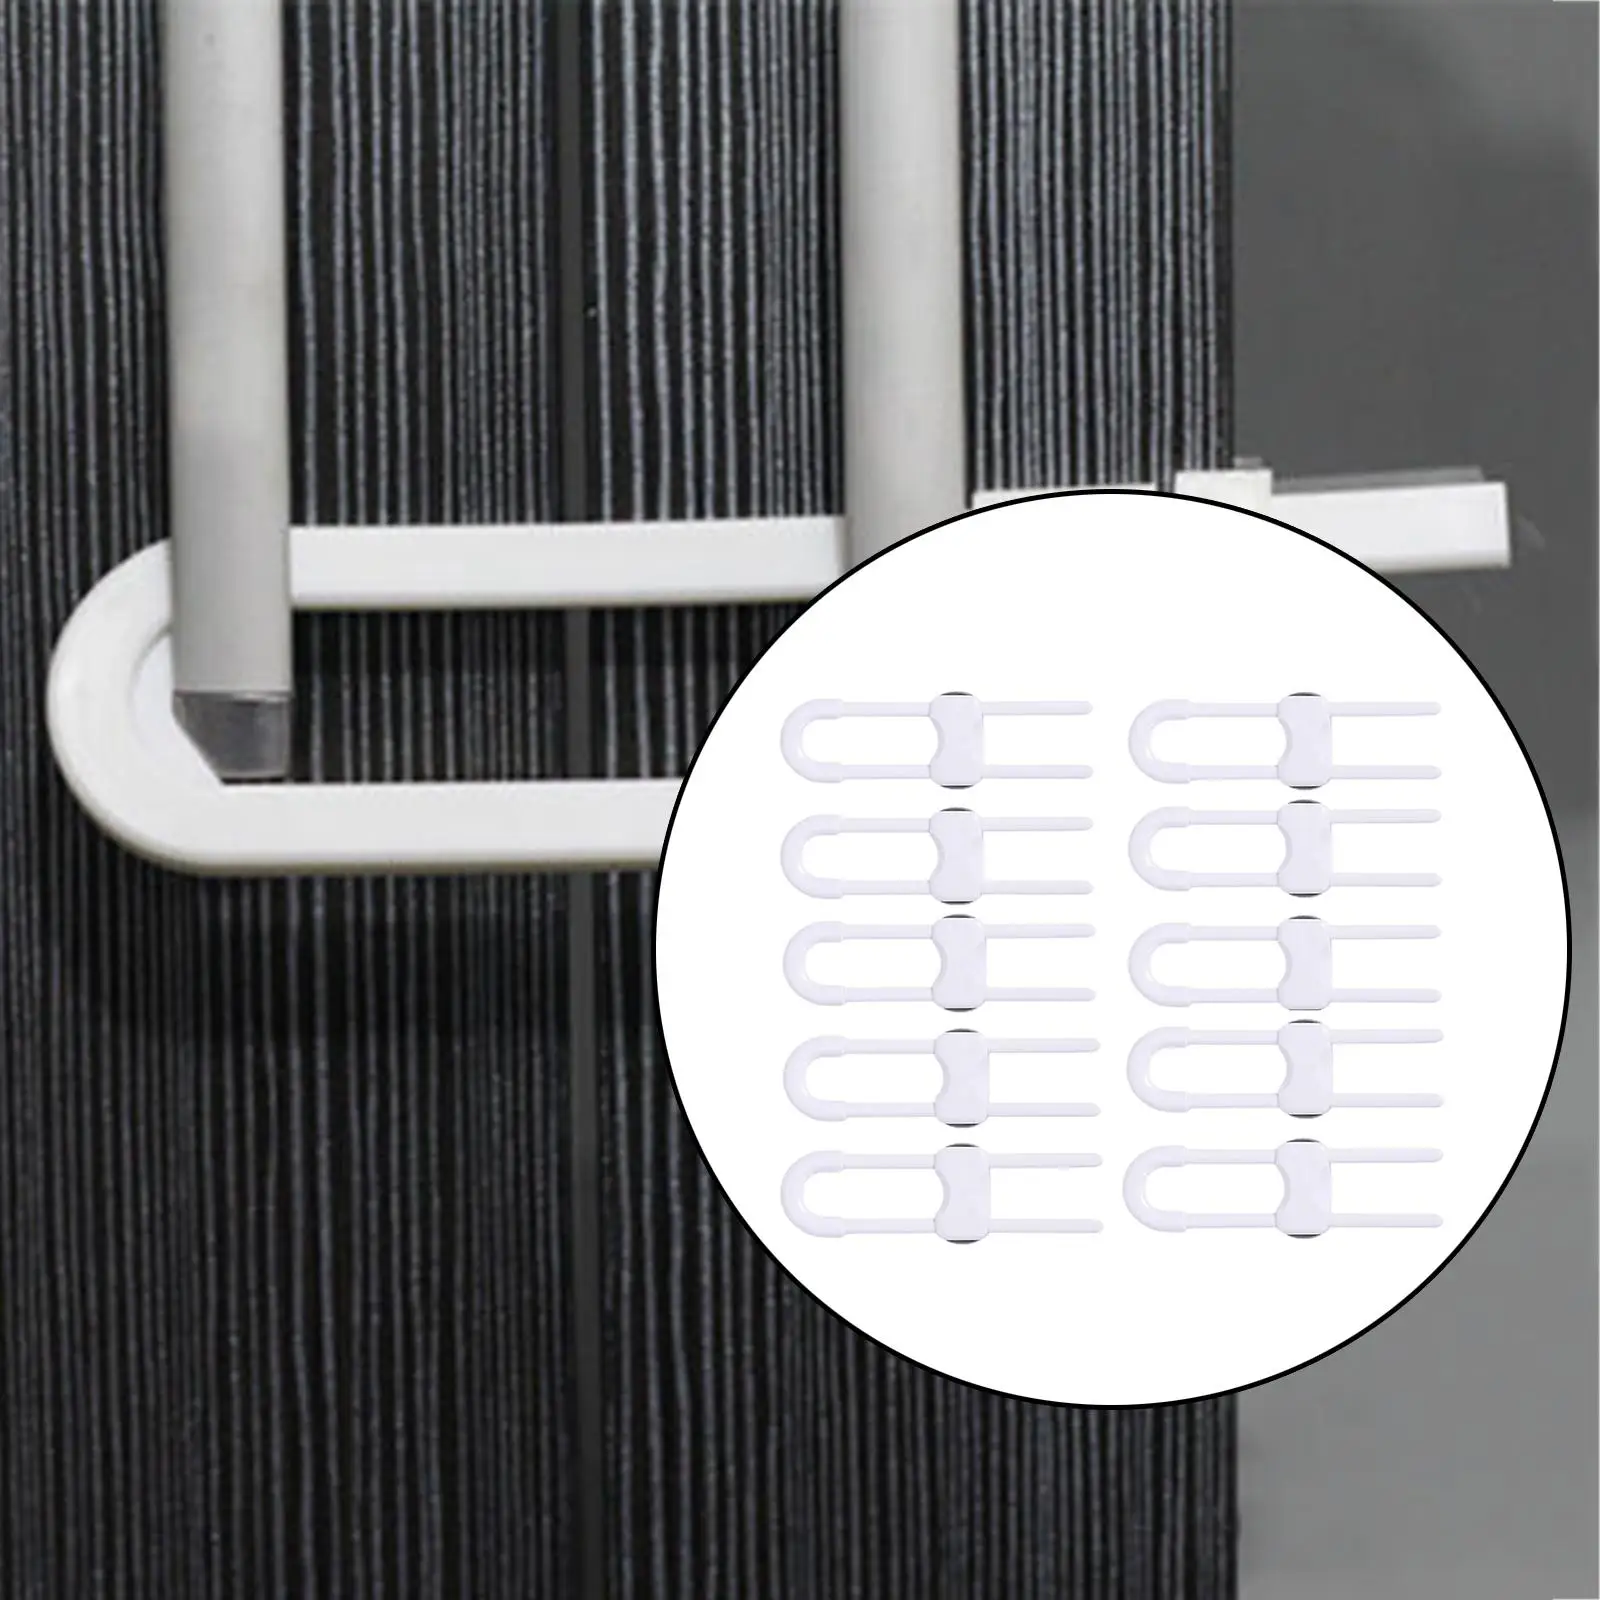 10 Pieces Baby Proofing latches White U-Shaped Sliding Cabinet Locks for Handles Cupboard Drawers Fridge Doors Cabinet